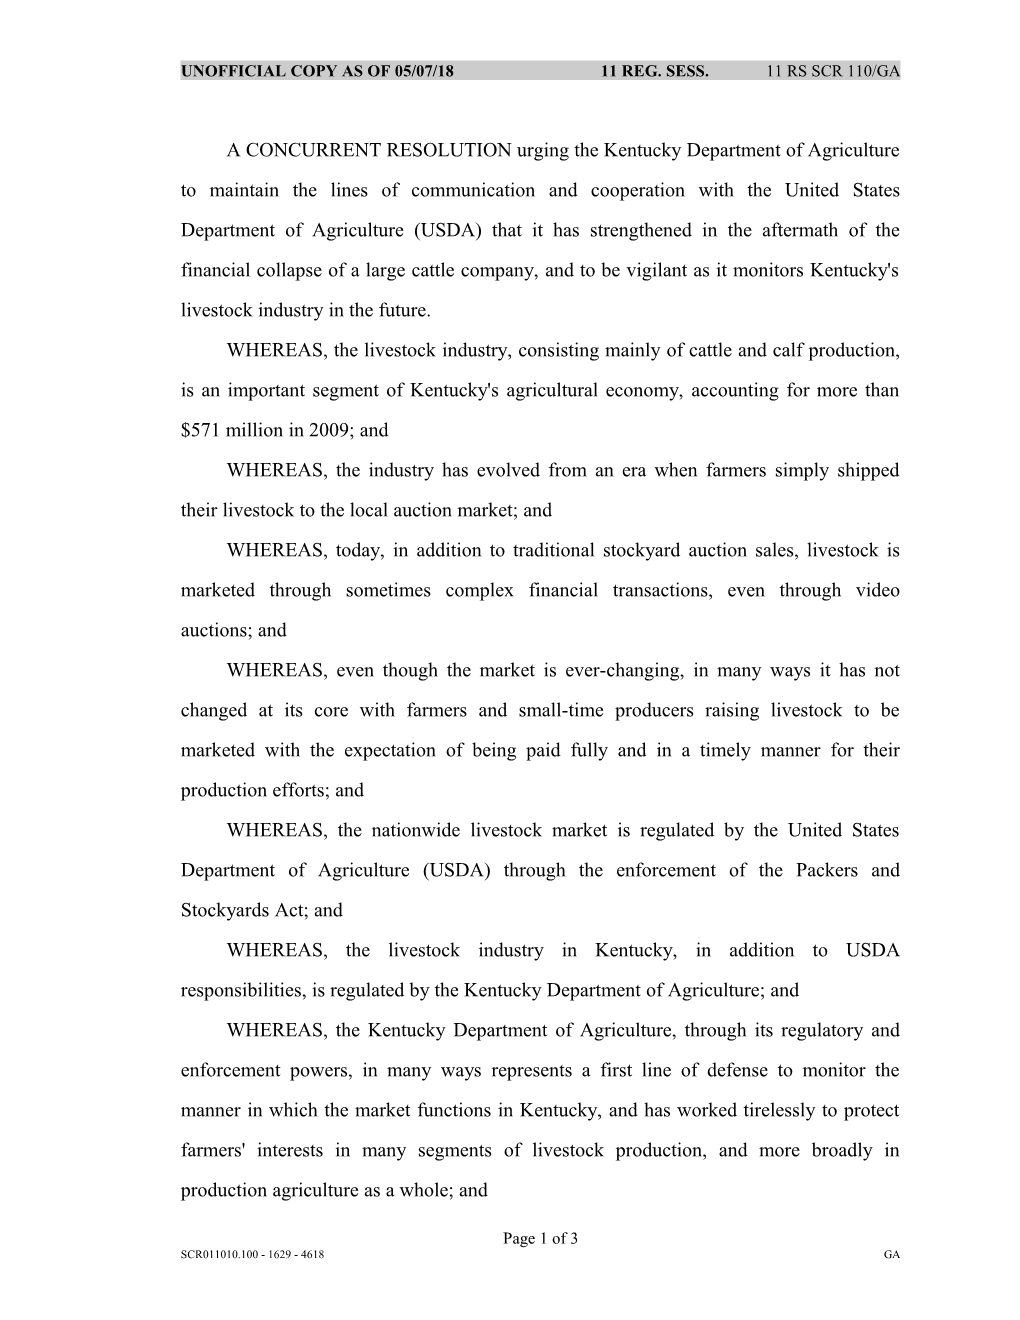 A CONCURRENT RESOLUTION Urging the Kentucky Department of Agriculture to Maintain the Lines